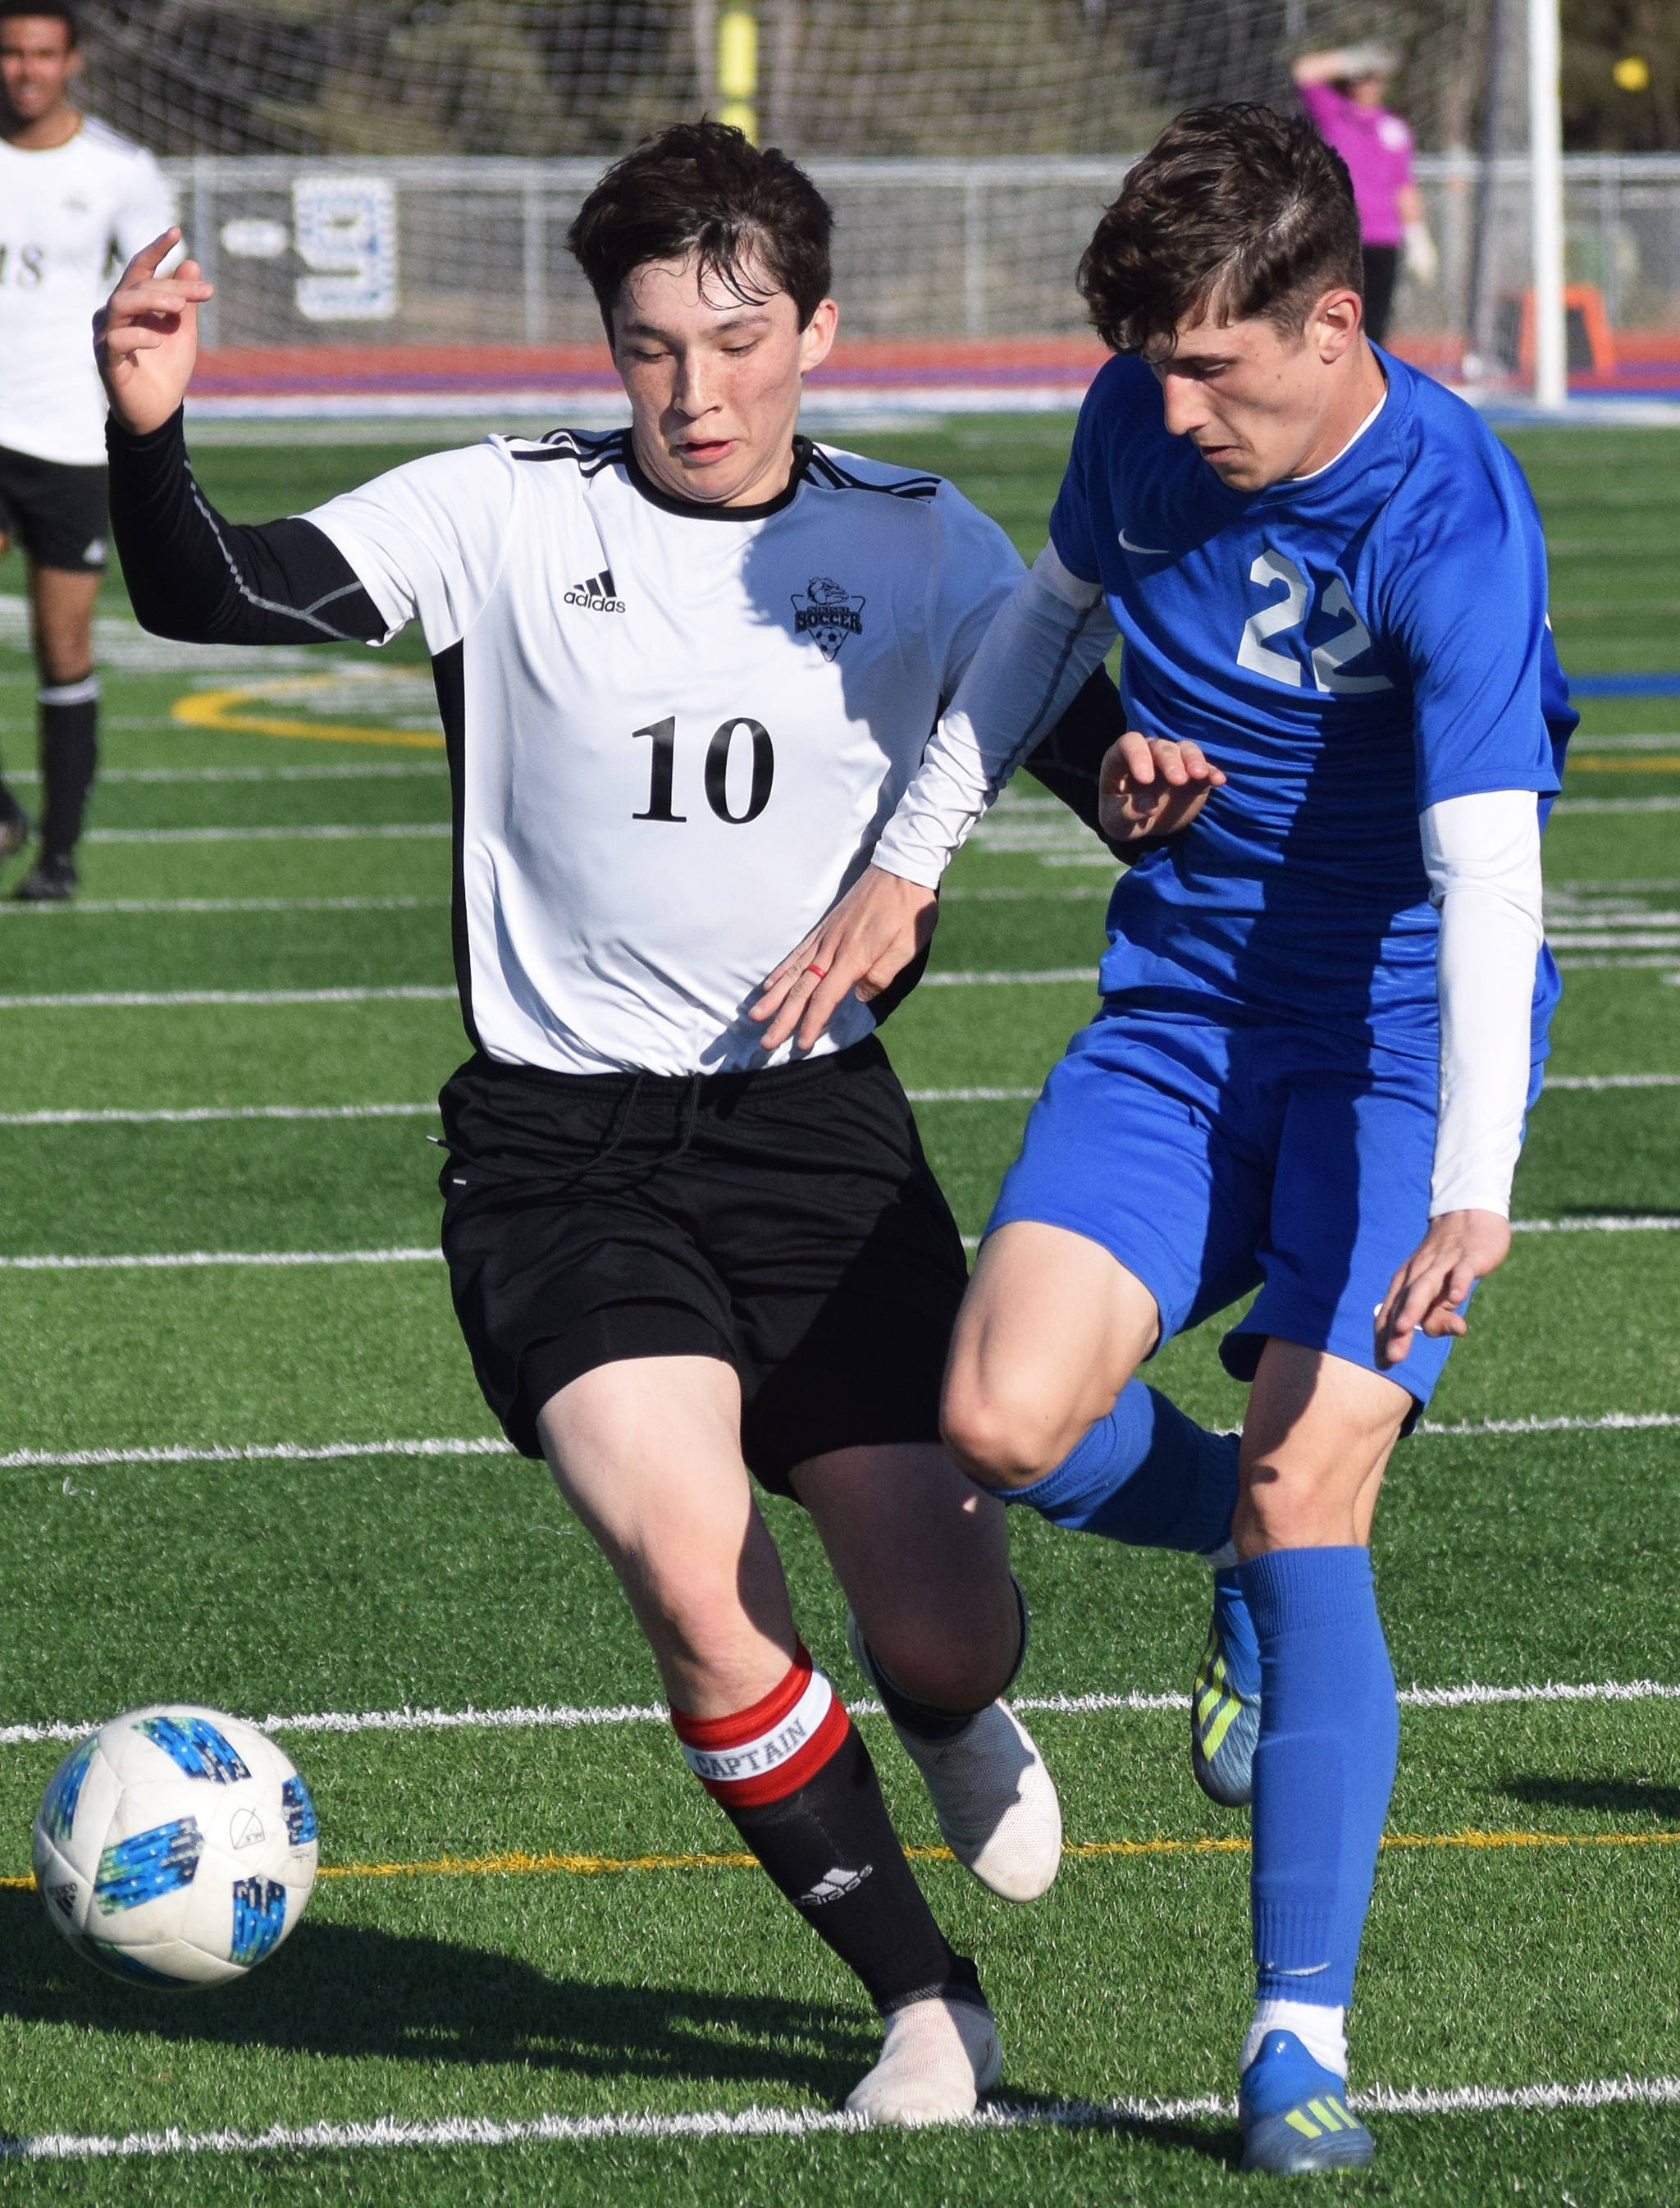 Nikiski’s Michael Mysing (10) and Soldotna’s Josh Heiber battle for possession Tuesday in a Peninsula Conference game at Soldotna High School. (Photo by Joey Klecka/Peninsula Clarion)